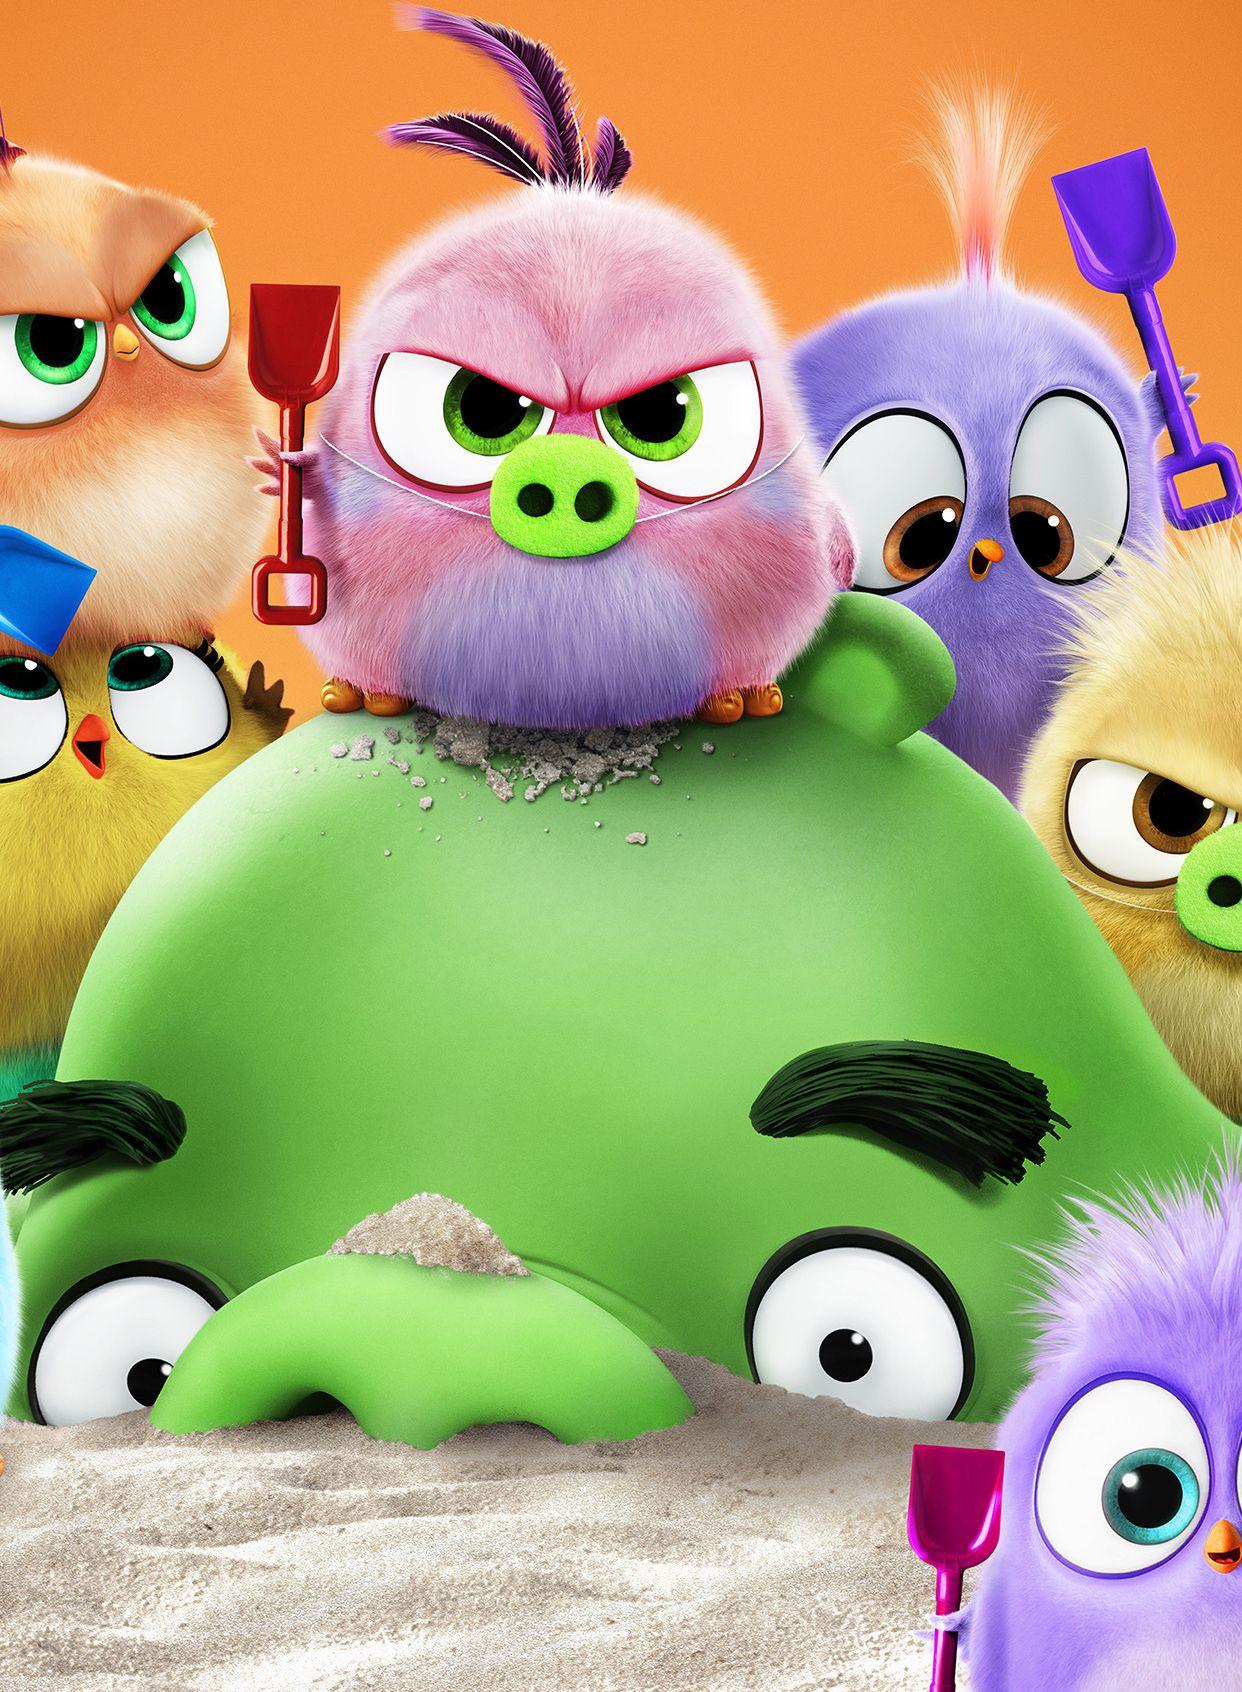 movie the angry birds movie 2 iPhone Xs Max wallpaper 03 2019. Grab